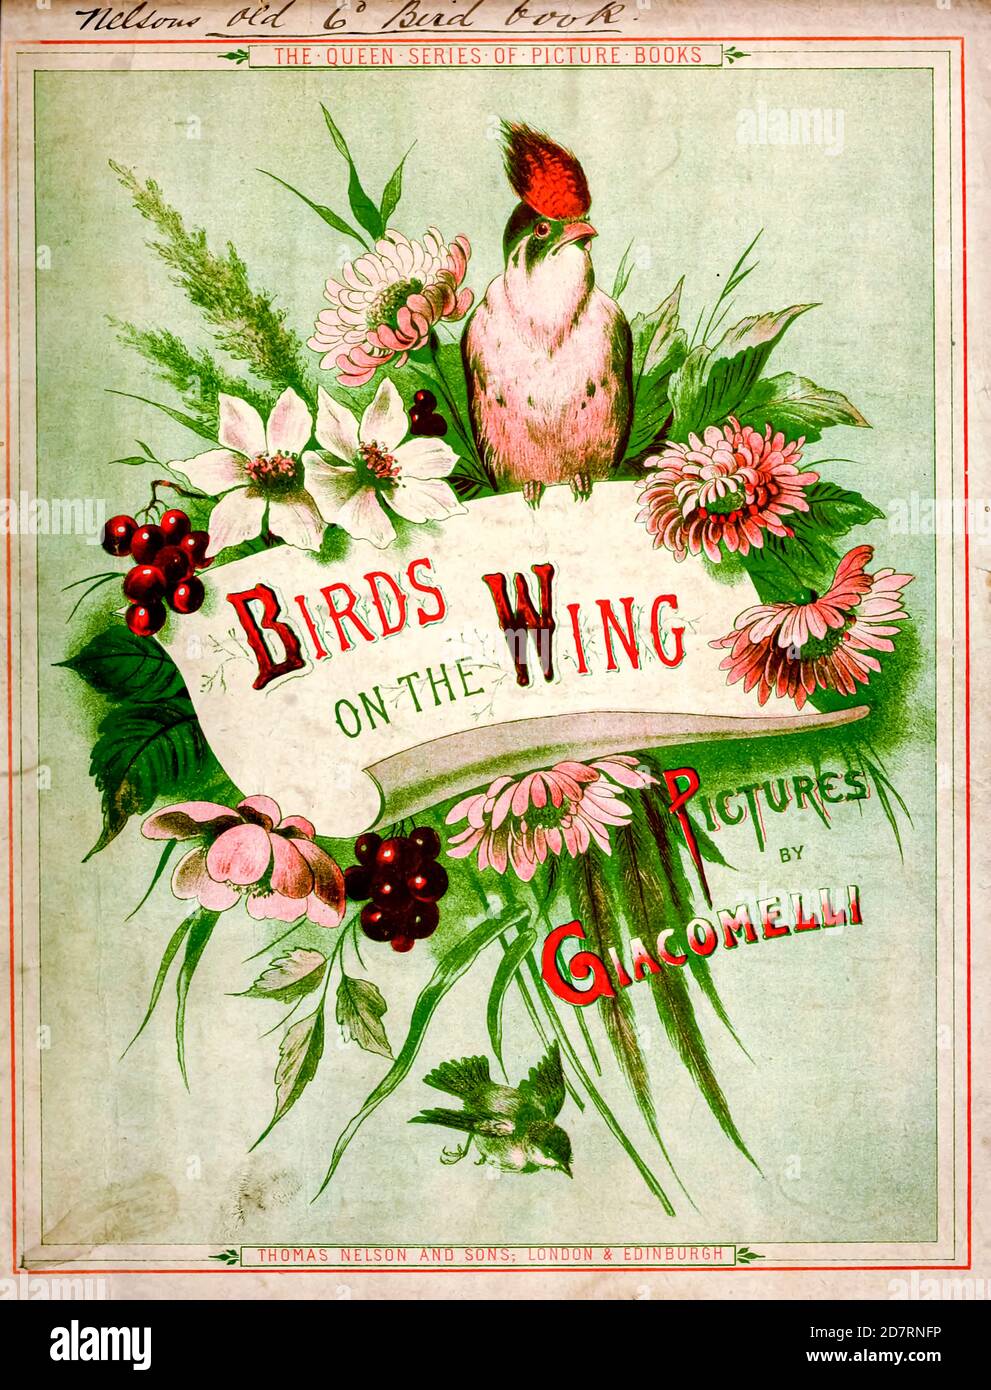 colourful book cover of 'Birds on the wing' by Giacomelli [Hector Giacomelli (April 1, 1822 in Paris – December 1, 1904 in Menton), was a French watercolorist, engraver and illustrator, best known for his paintings of birds.] Published in London by Thomas Nelson & Sons 1878. The book contains Hand-colored plates with accompanying text in verse Stock Photo